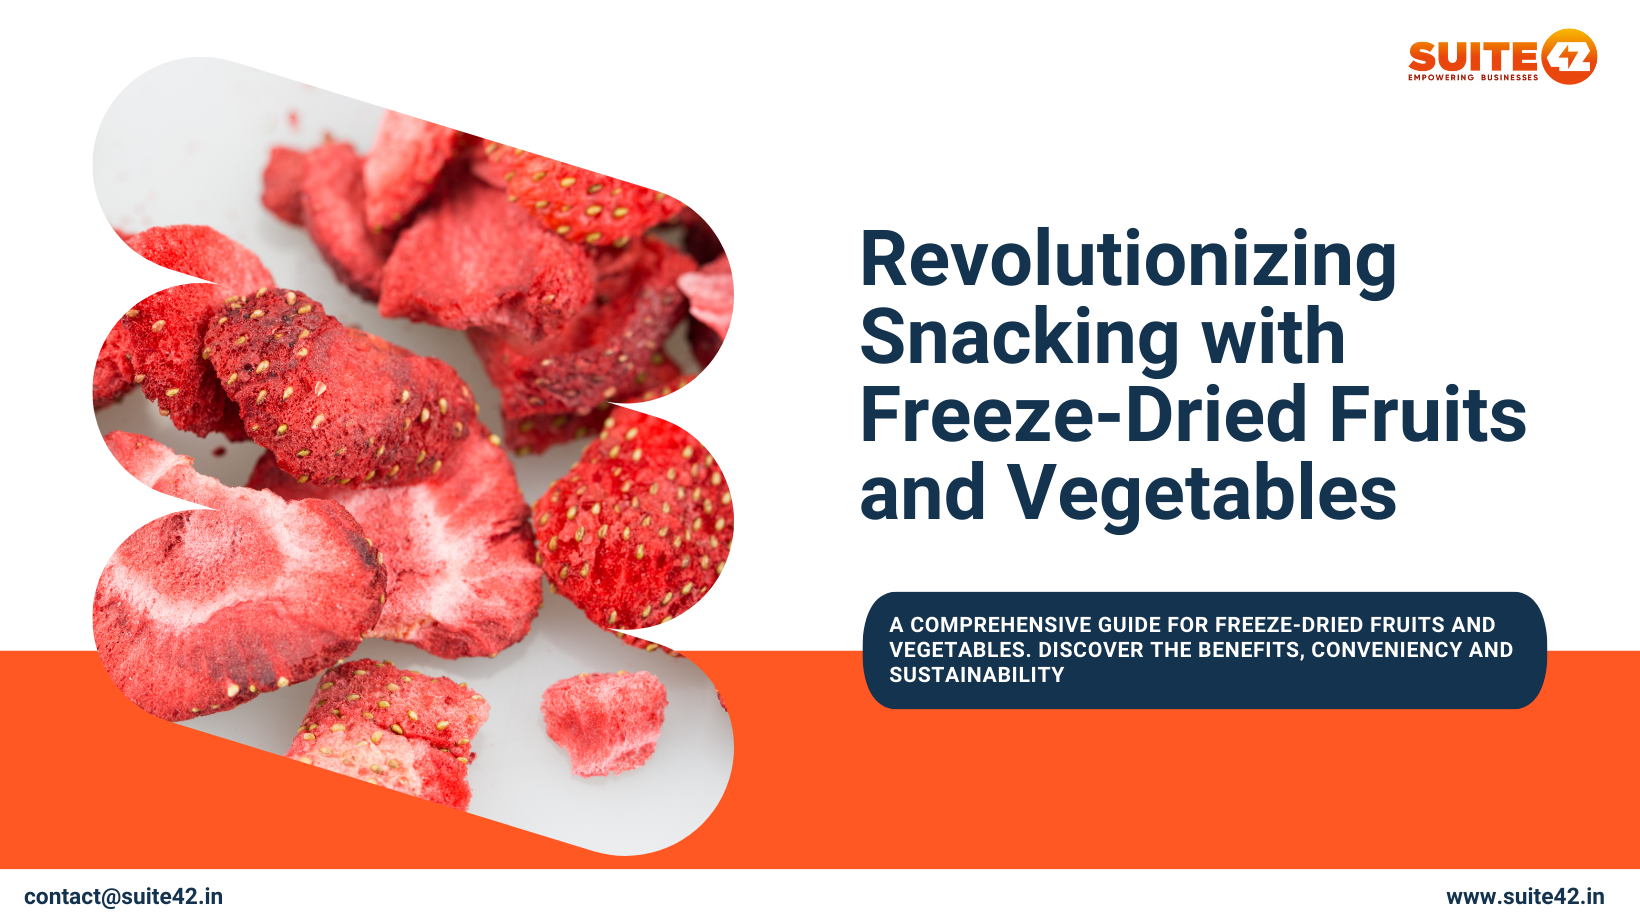 Snacking Revolution: Freeze-Dried Fruits & Vegetables